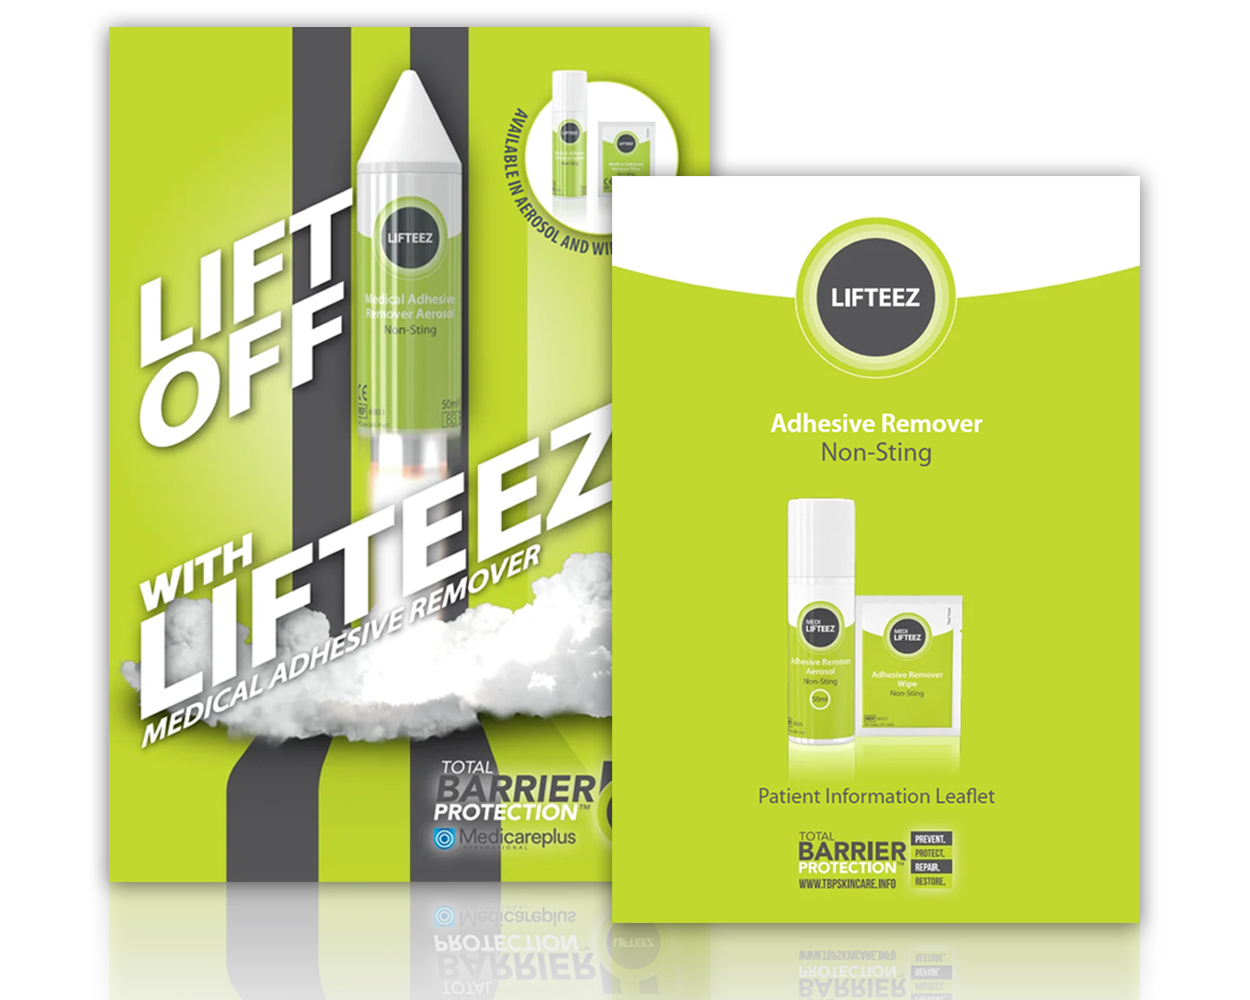 Lifteez Adhesive Remover – Product Information Pack